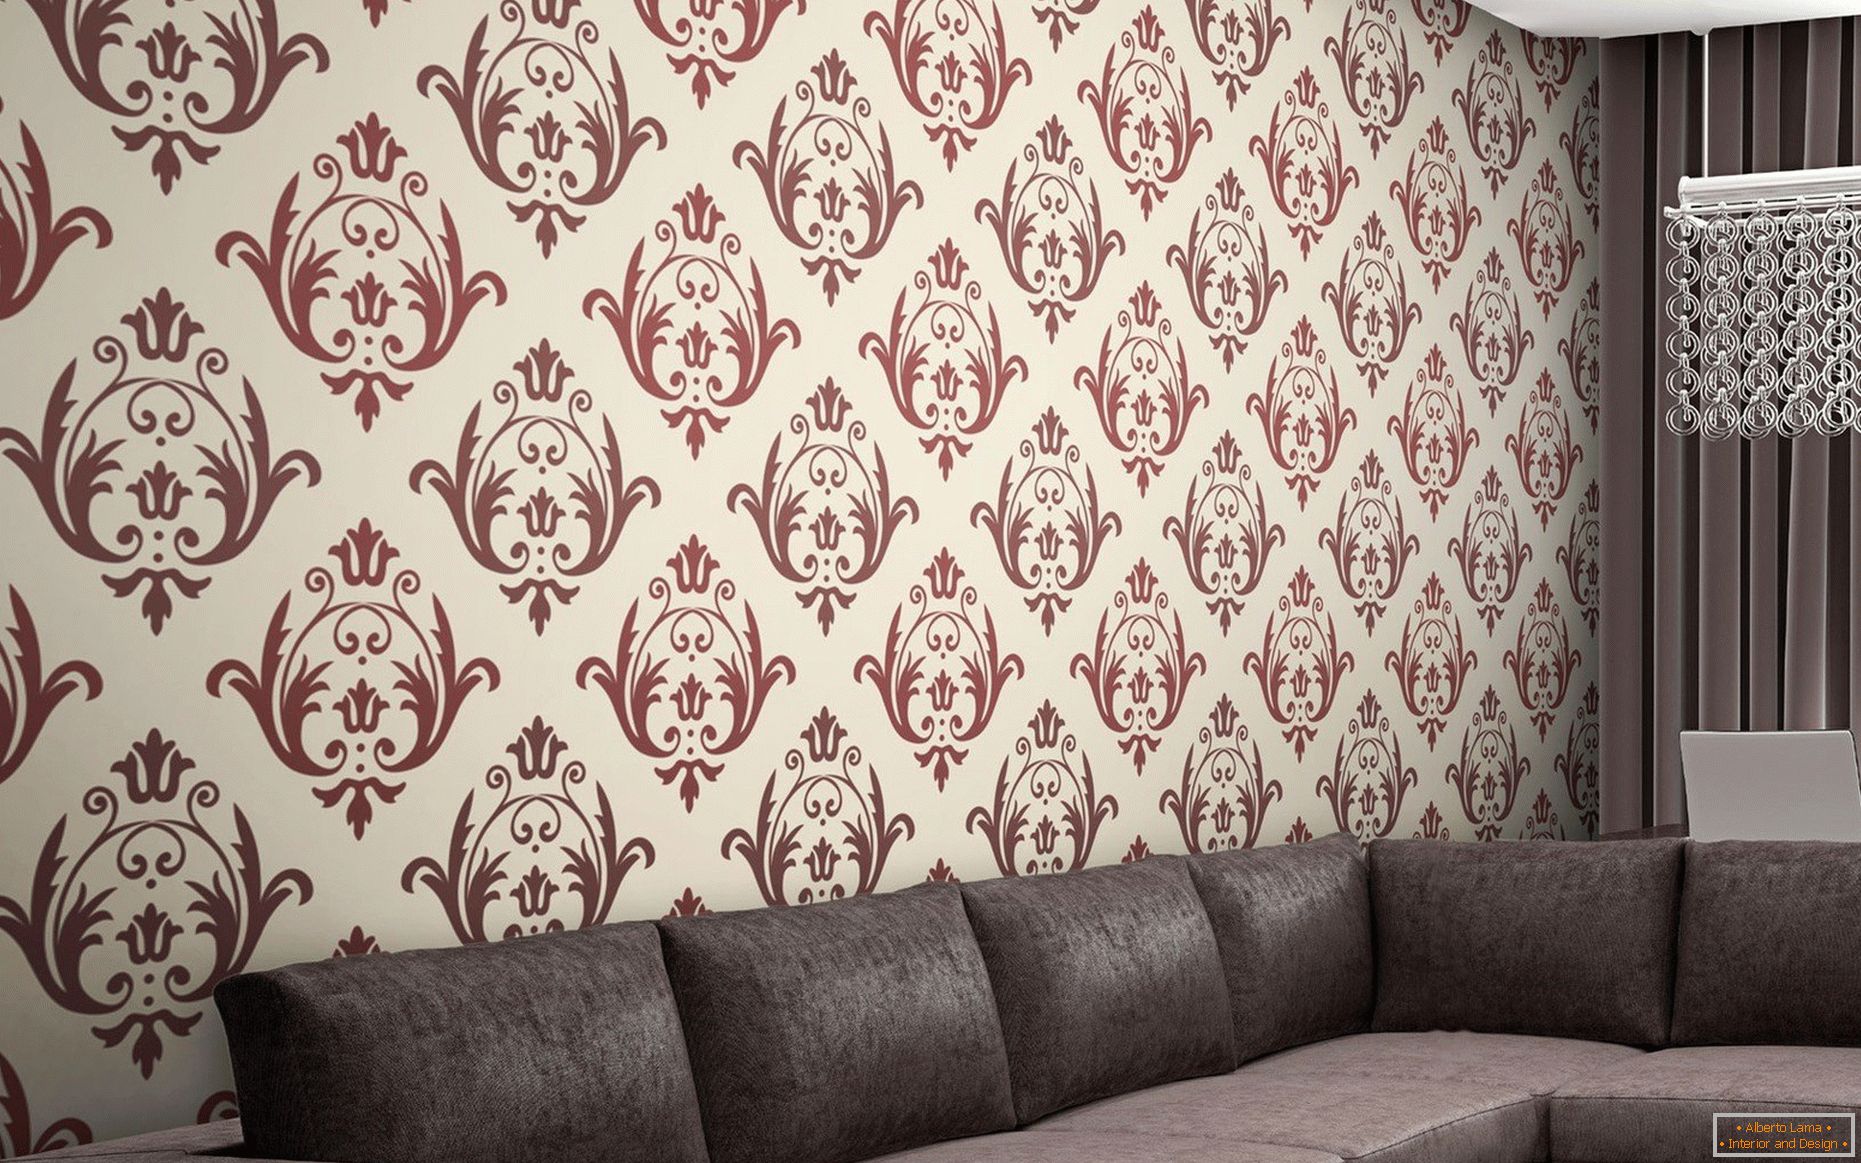 Design-project of a wall covered with wallpaper